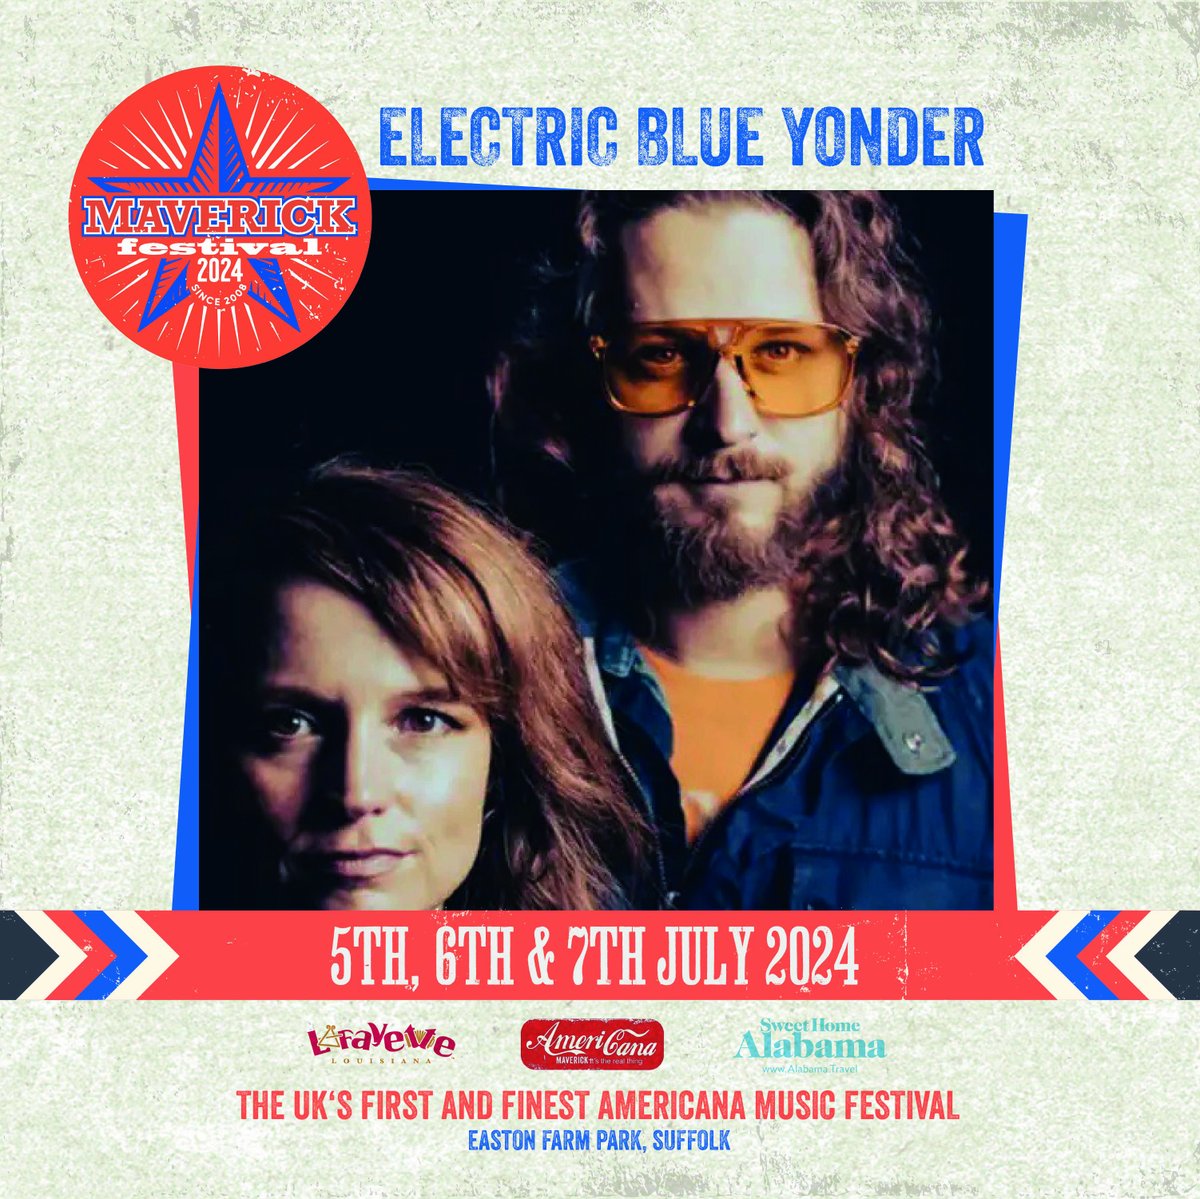 Three more artists hitching their wagons to this year's fest - Seattle alt country rockers @massyferguson, East Nashville Americana noir troubadour Ben de la Cour and Alabama's psychedelic folk rockers @The_Yonderlust.